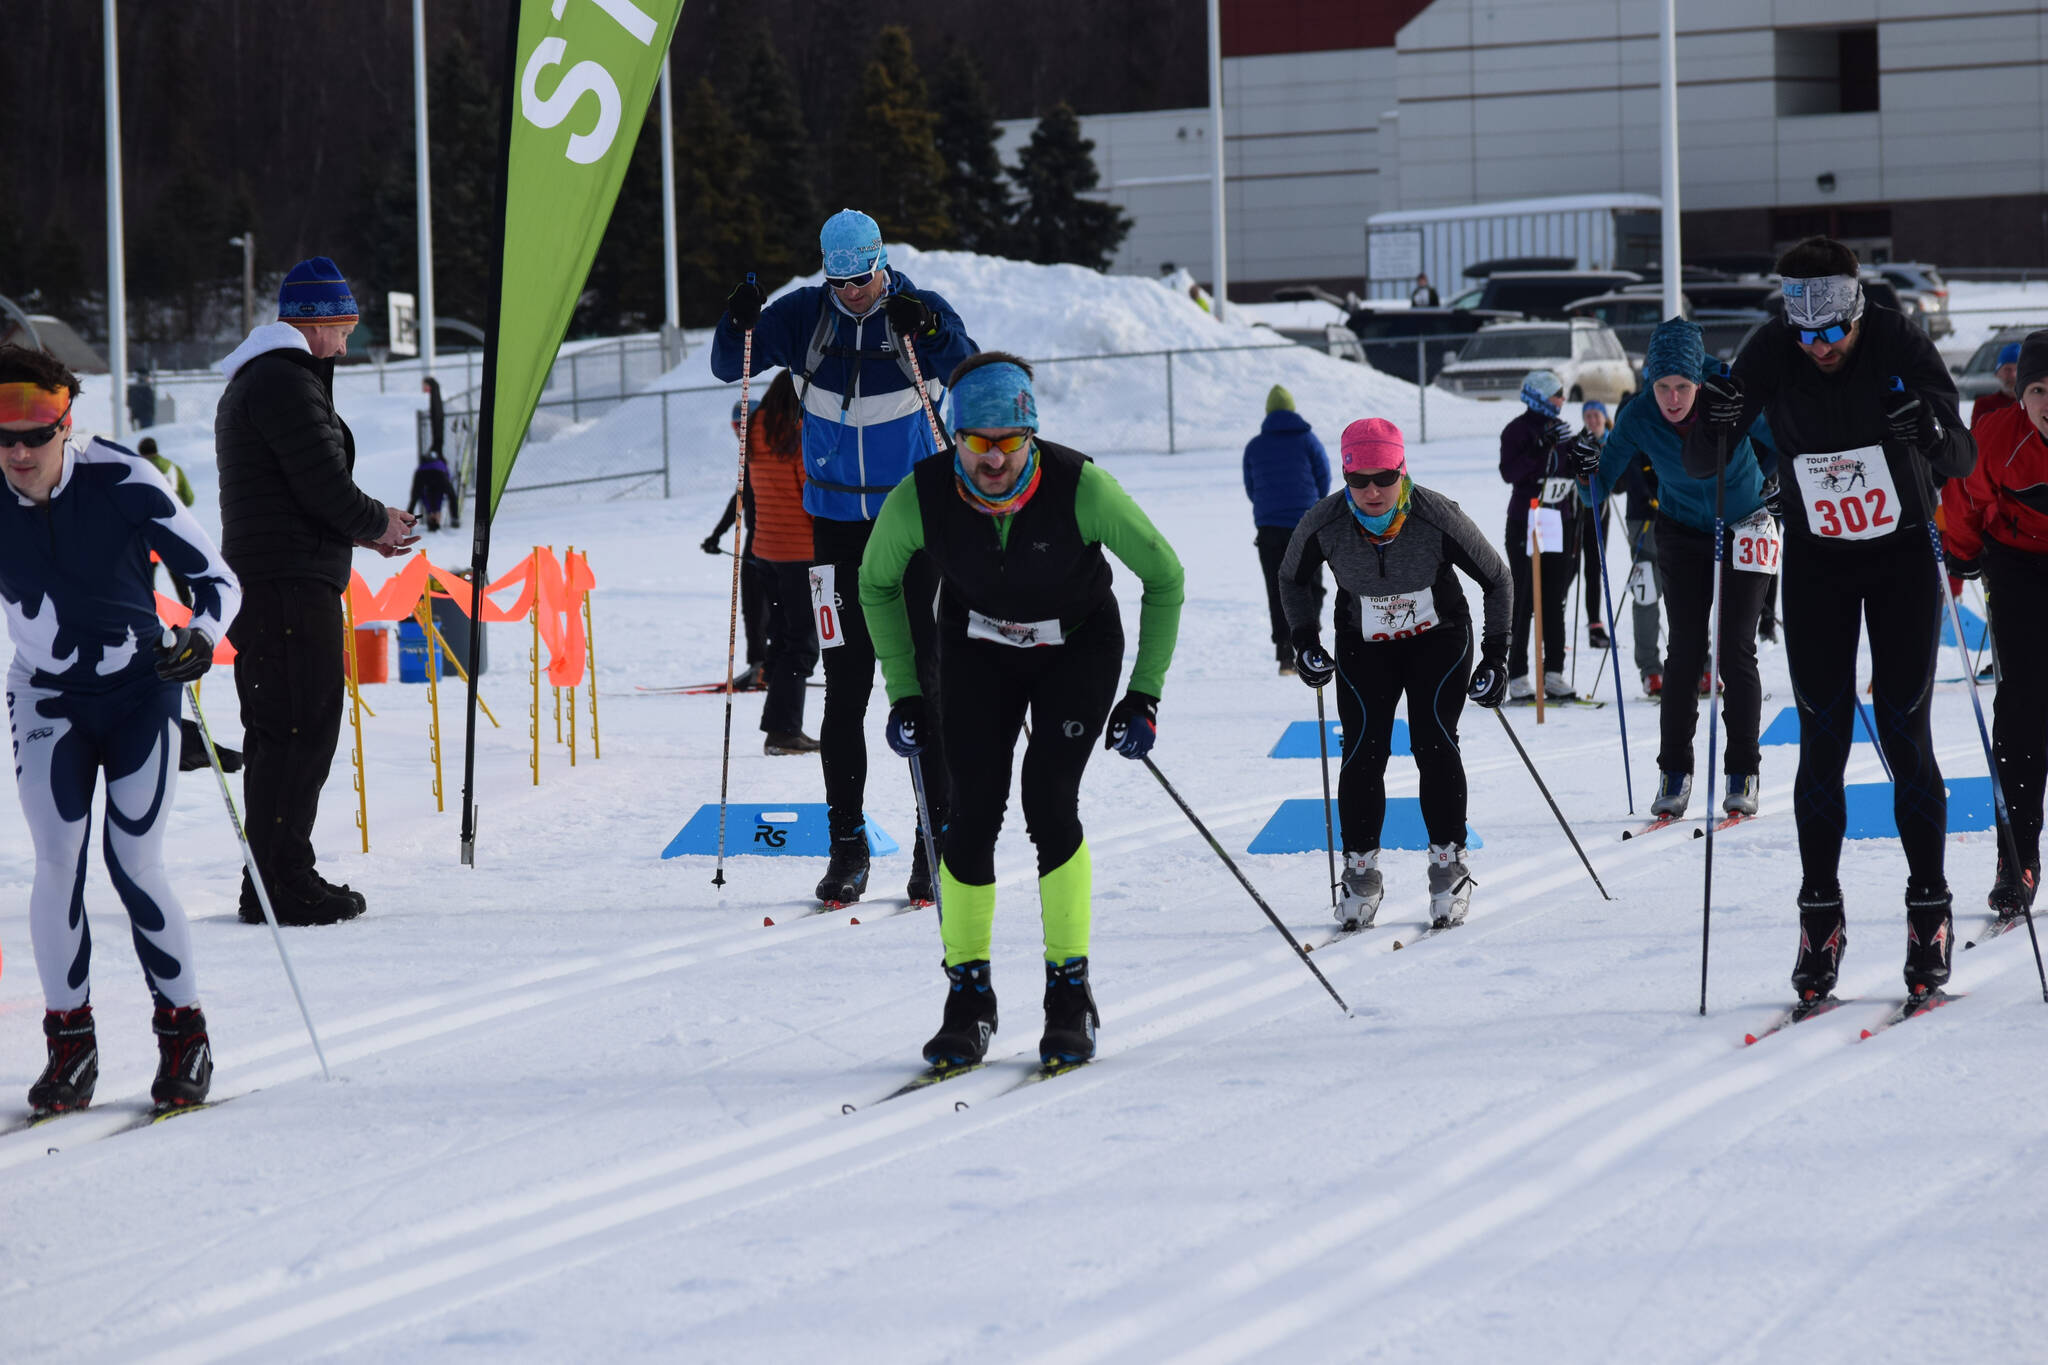 Skiers take off for the men’s 40K freestyle race at Sunday’s Tour of Tsalteshi event just outside of Soldotna on Sunday, Feb. 20, 2022. (Camille Botello/Peninsula Clarion)